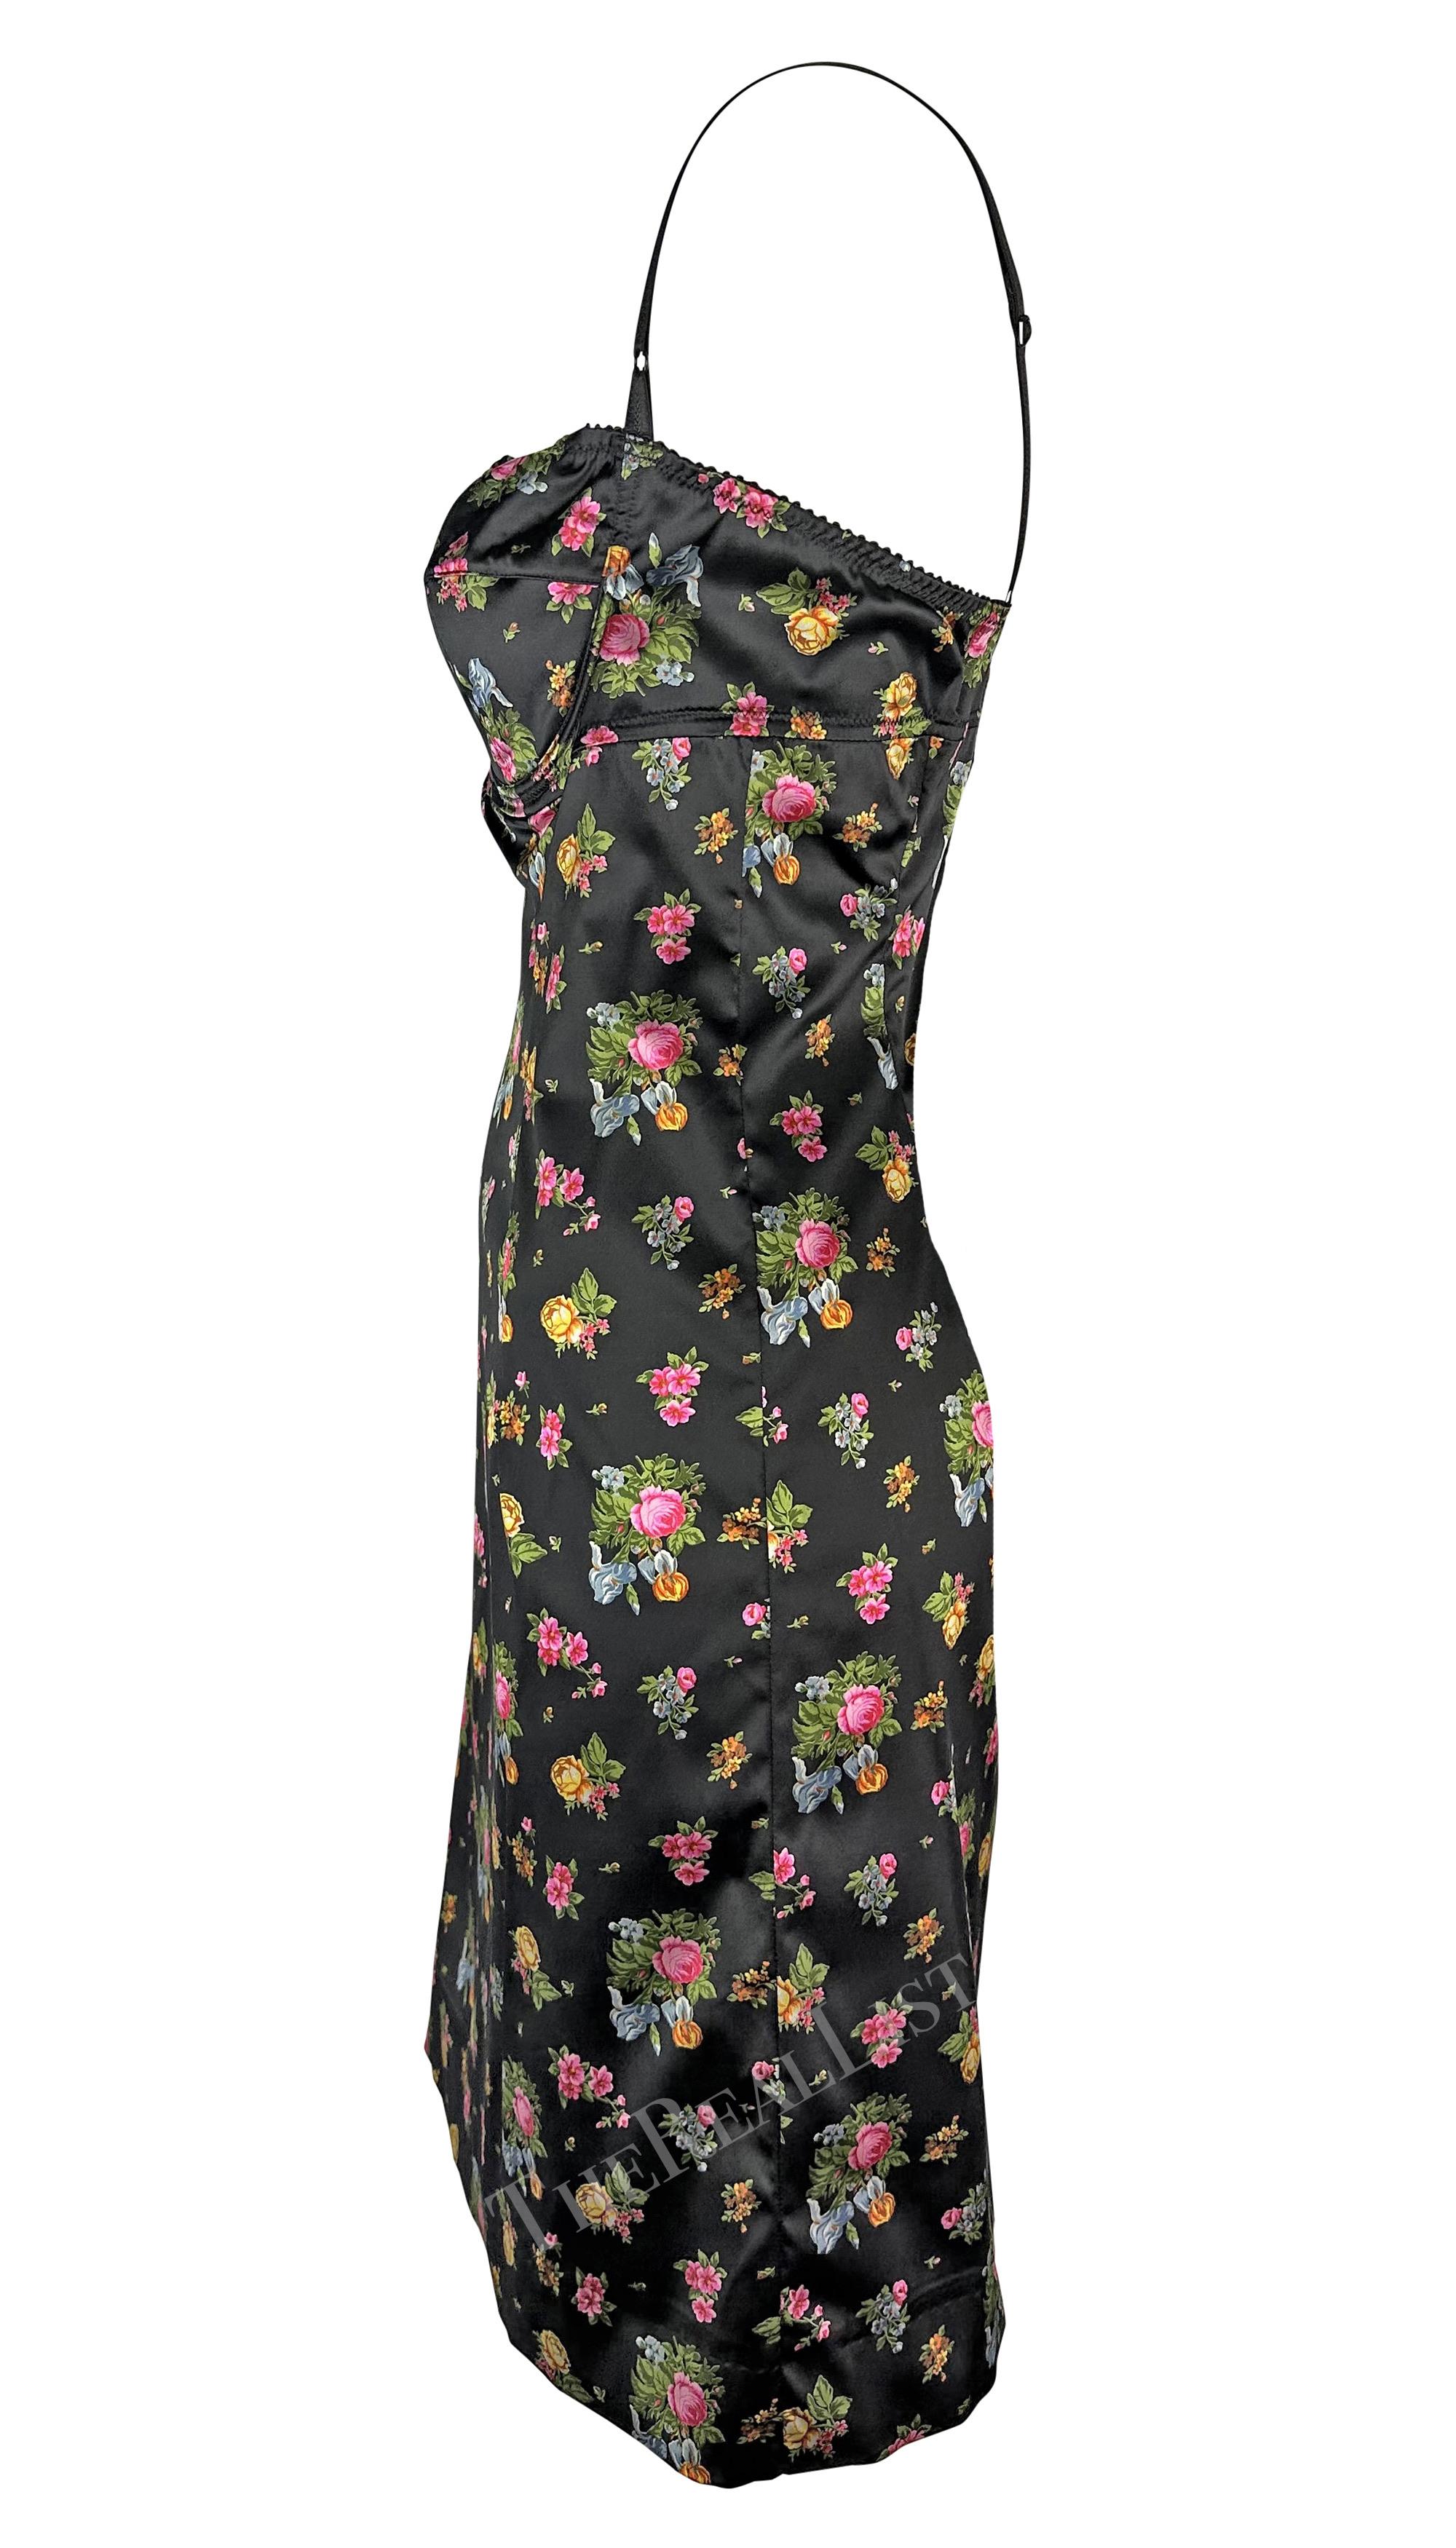 Early 2000s Dolce & Gabbana Black Floral Rose Mini Dress Y2K In Excellent Condition For Sale In West Hollywood, CA